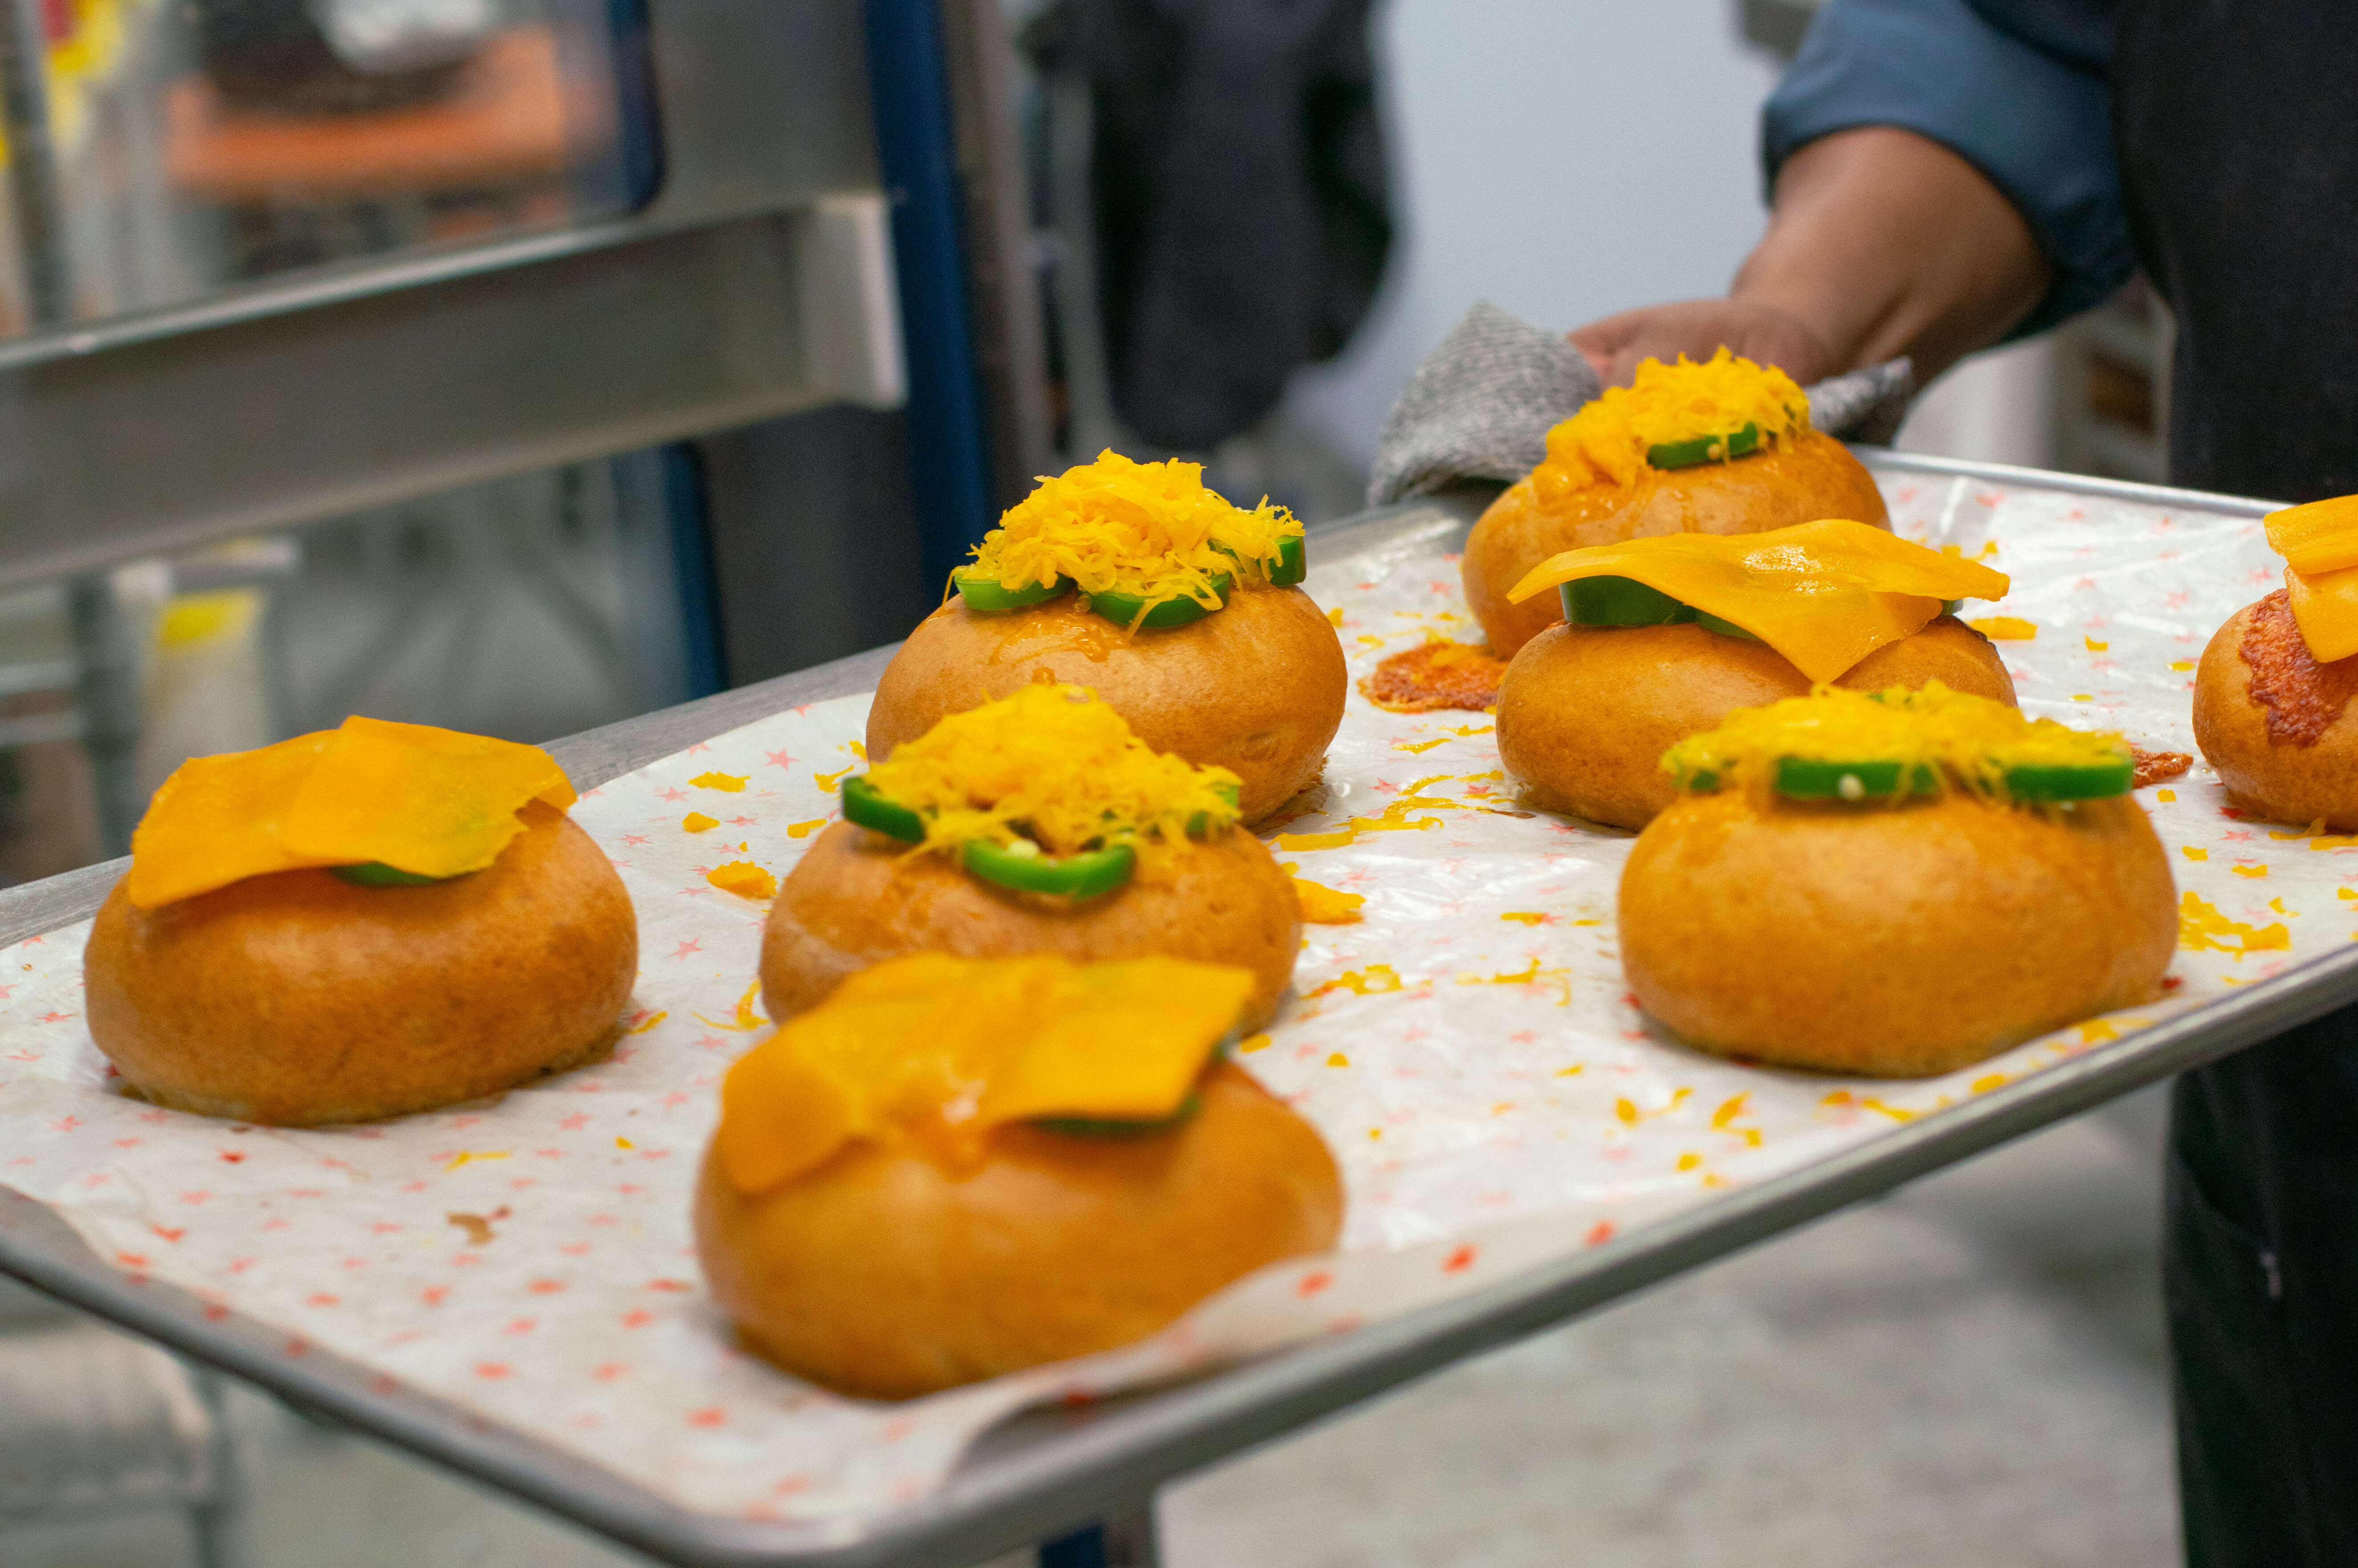 A baker holds a sheetpan full of tan bagels topped with jalapeño slices and cheddar cheese.